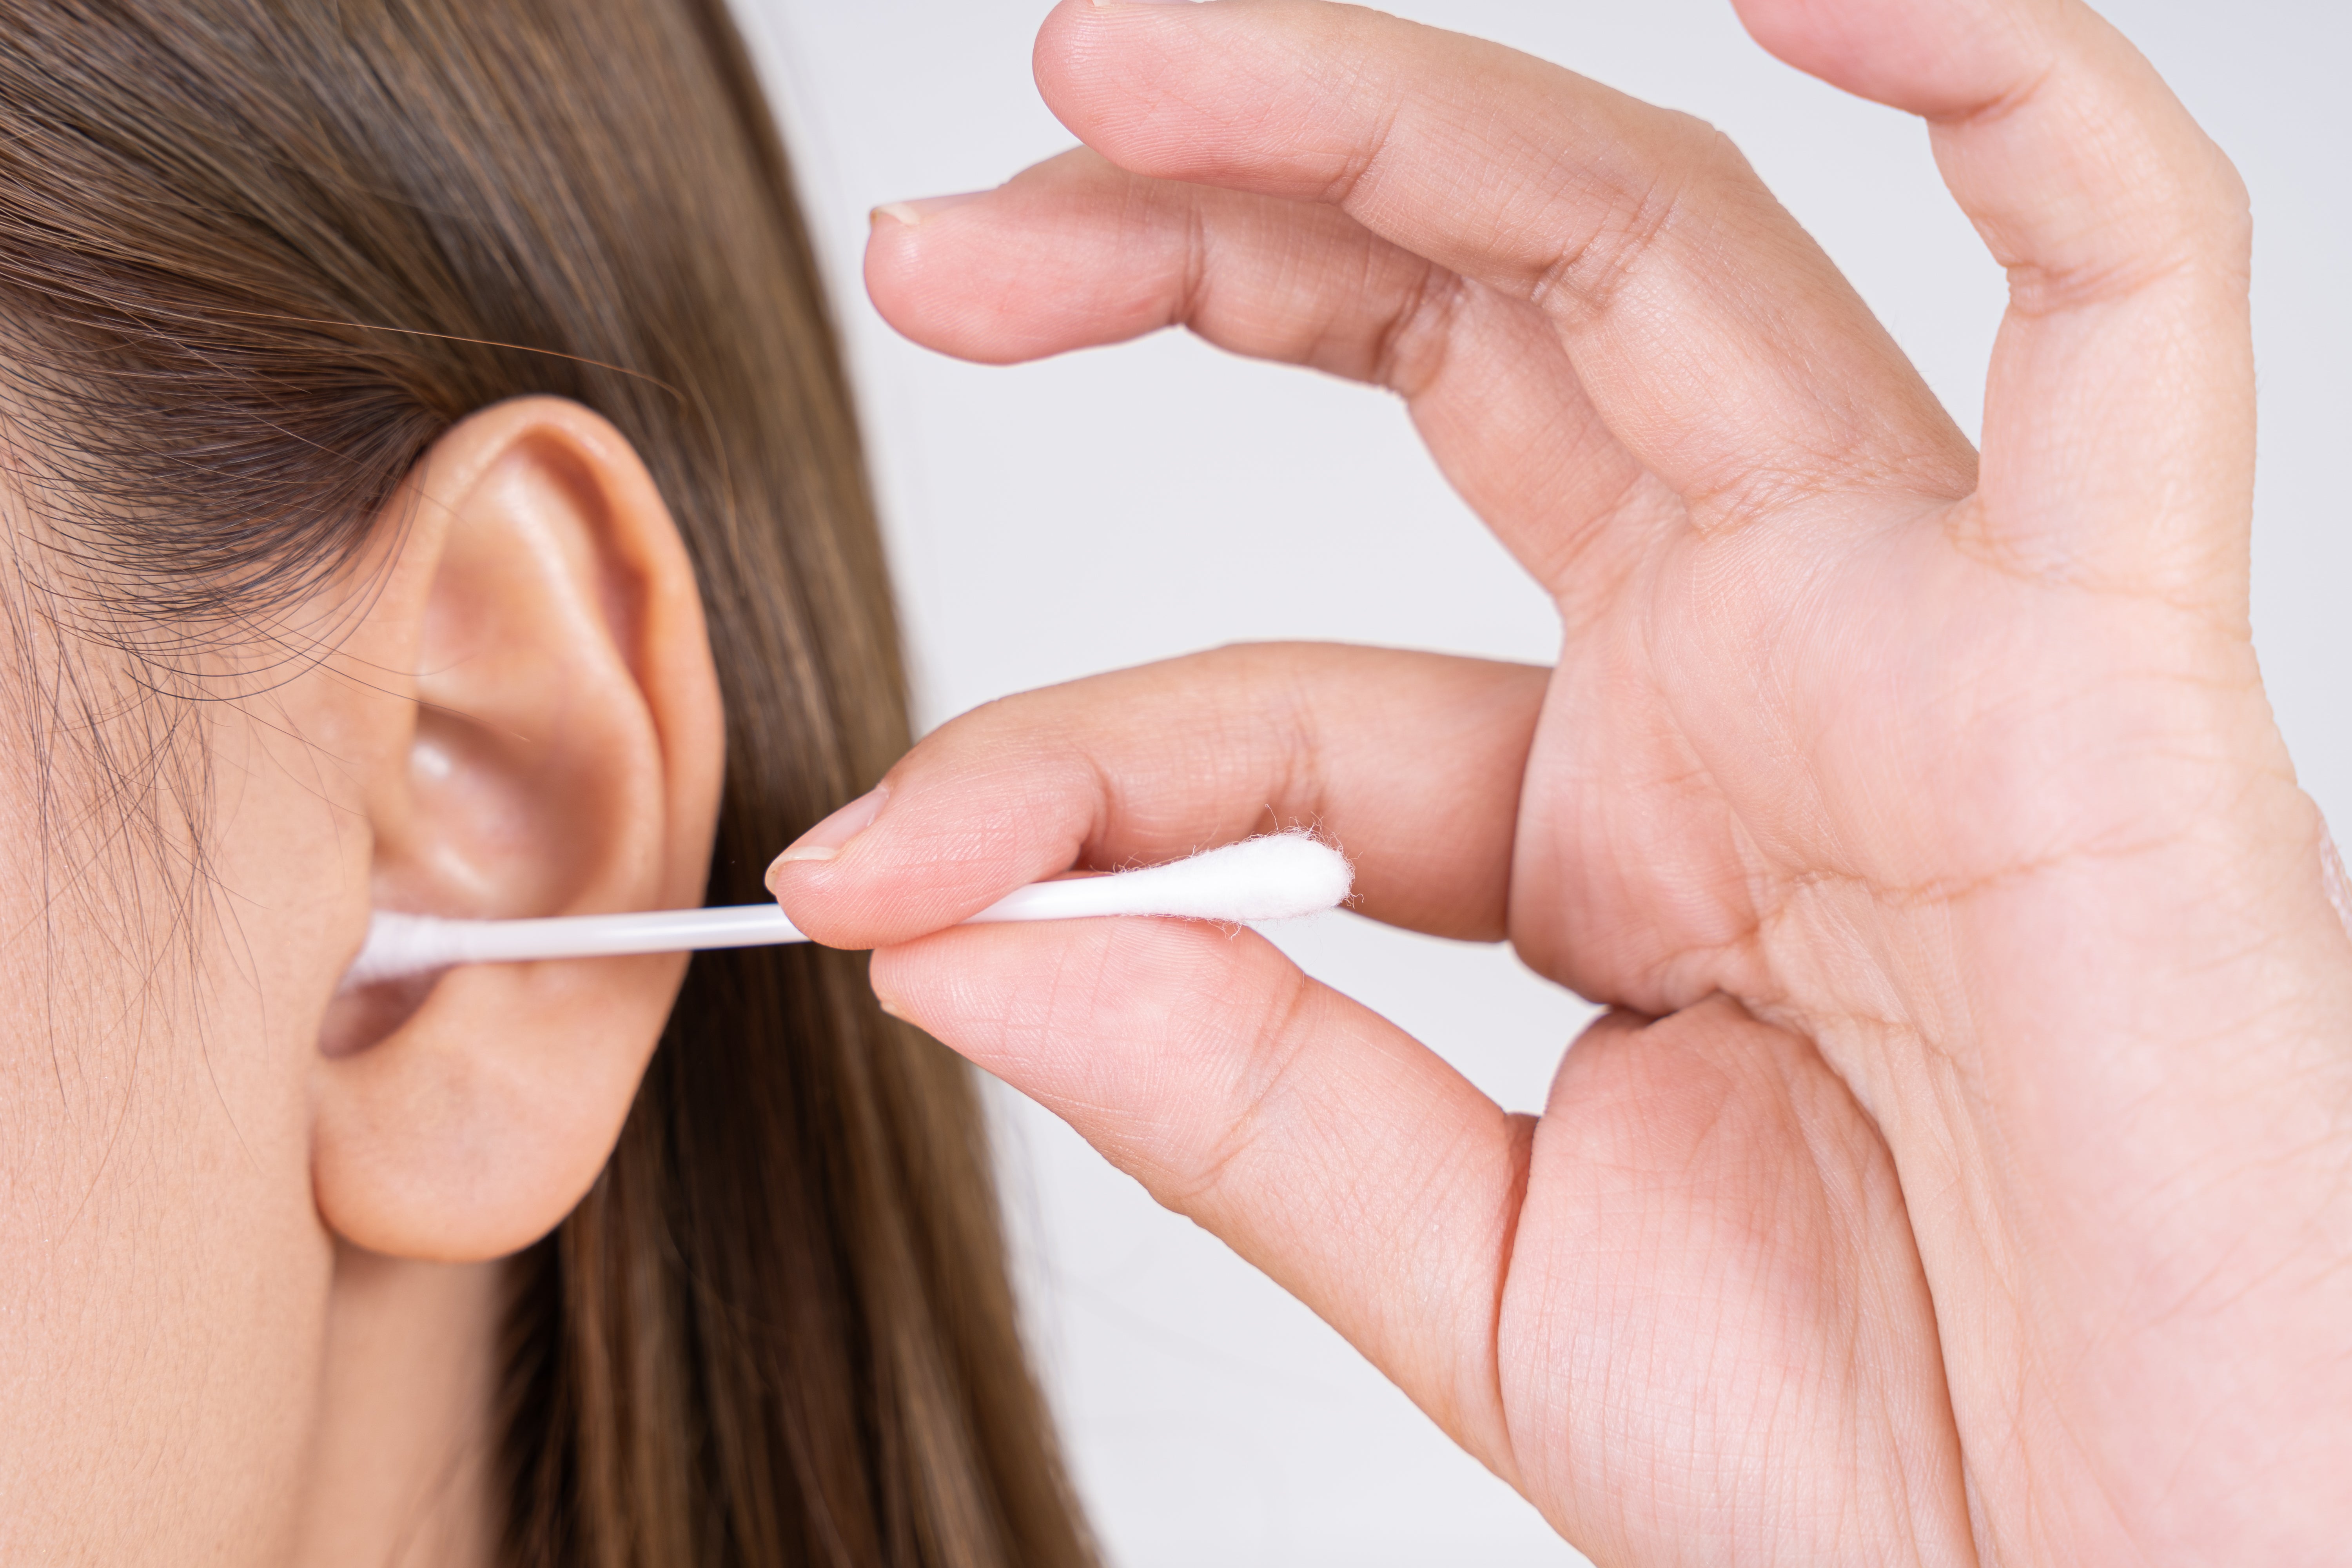 Scientists have created a device to test earwax for levels of stress hormone cortisol